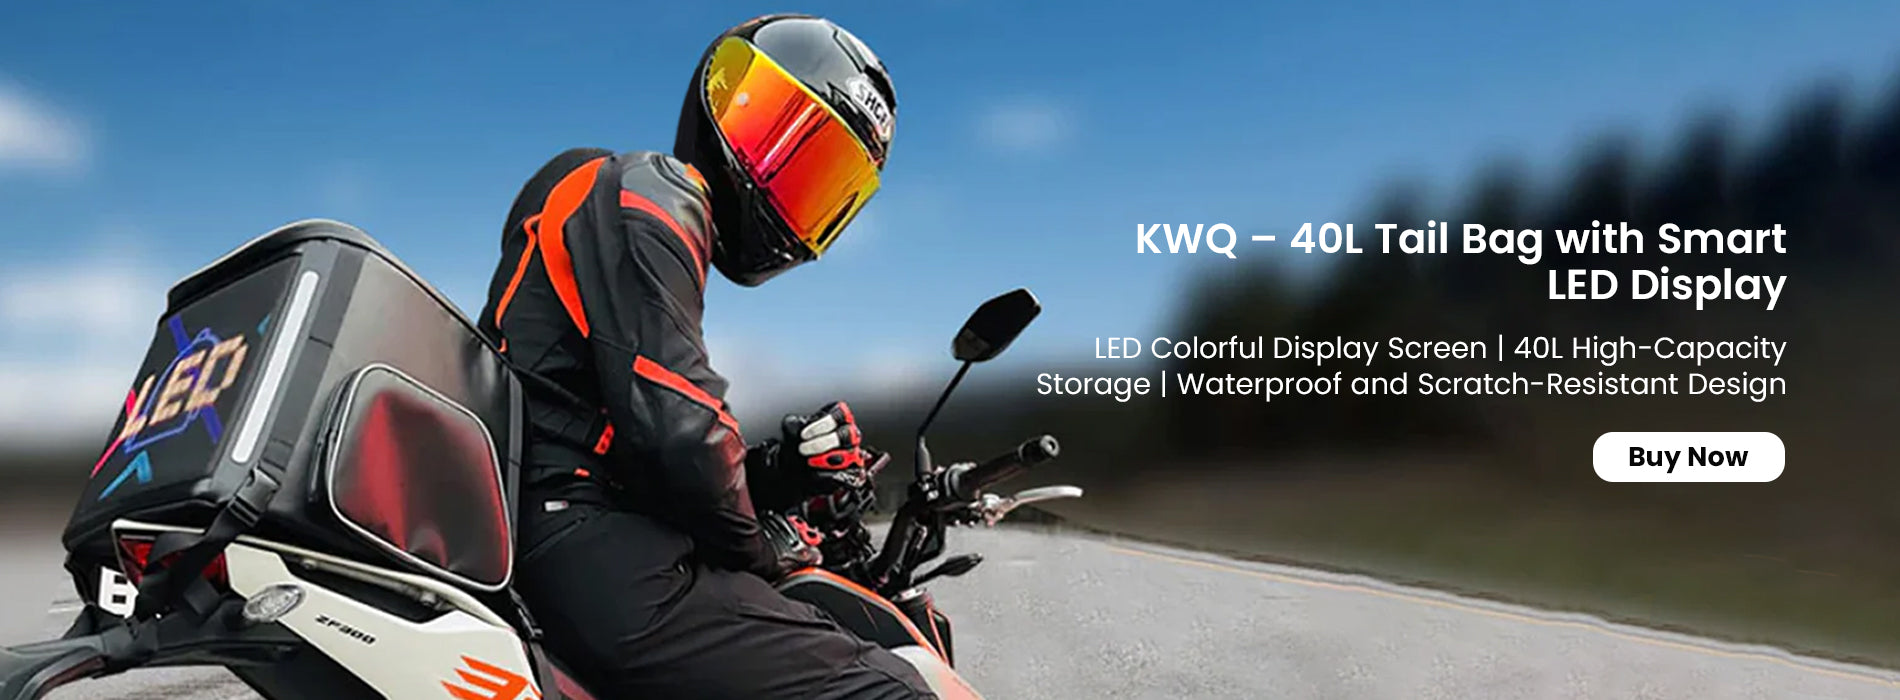 KWQ – 40L Tail Bag with Smart LED Display